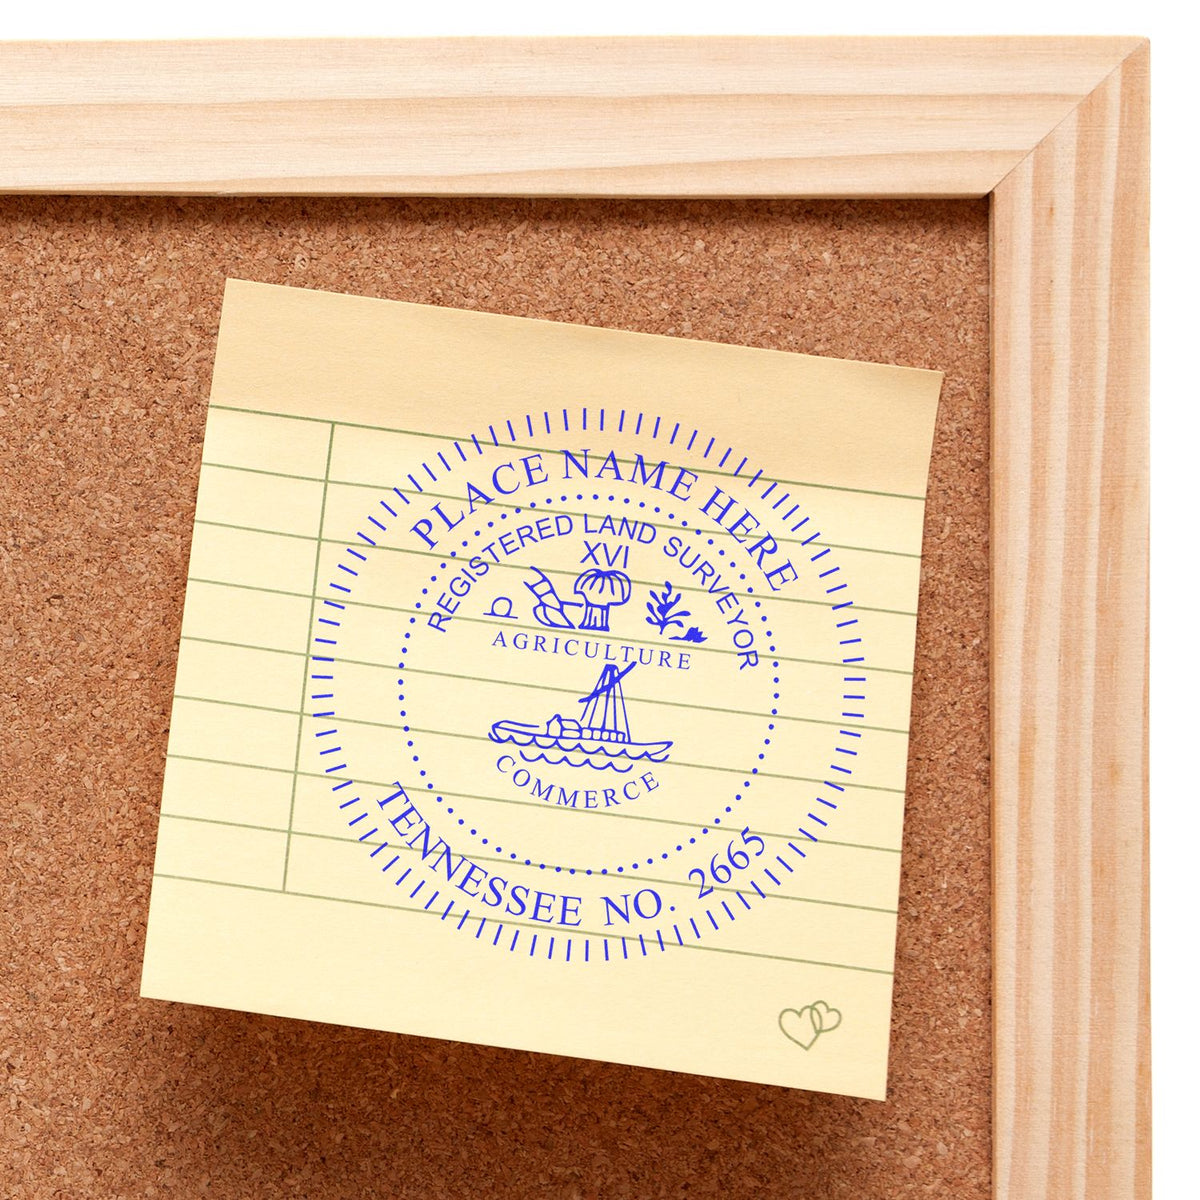 Tennessee Land Surveyor Seal Stamp In Use Photo